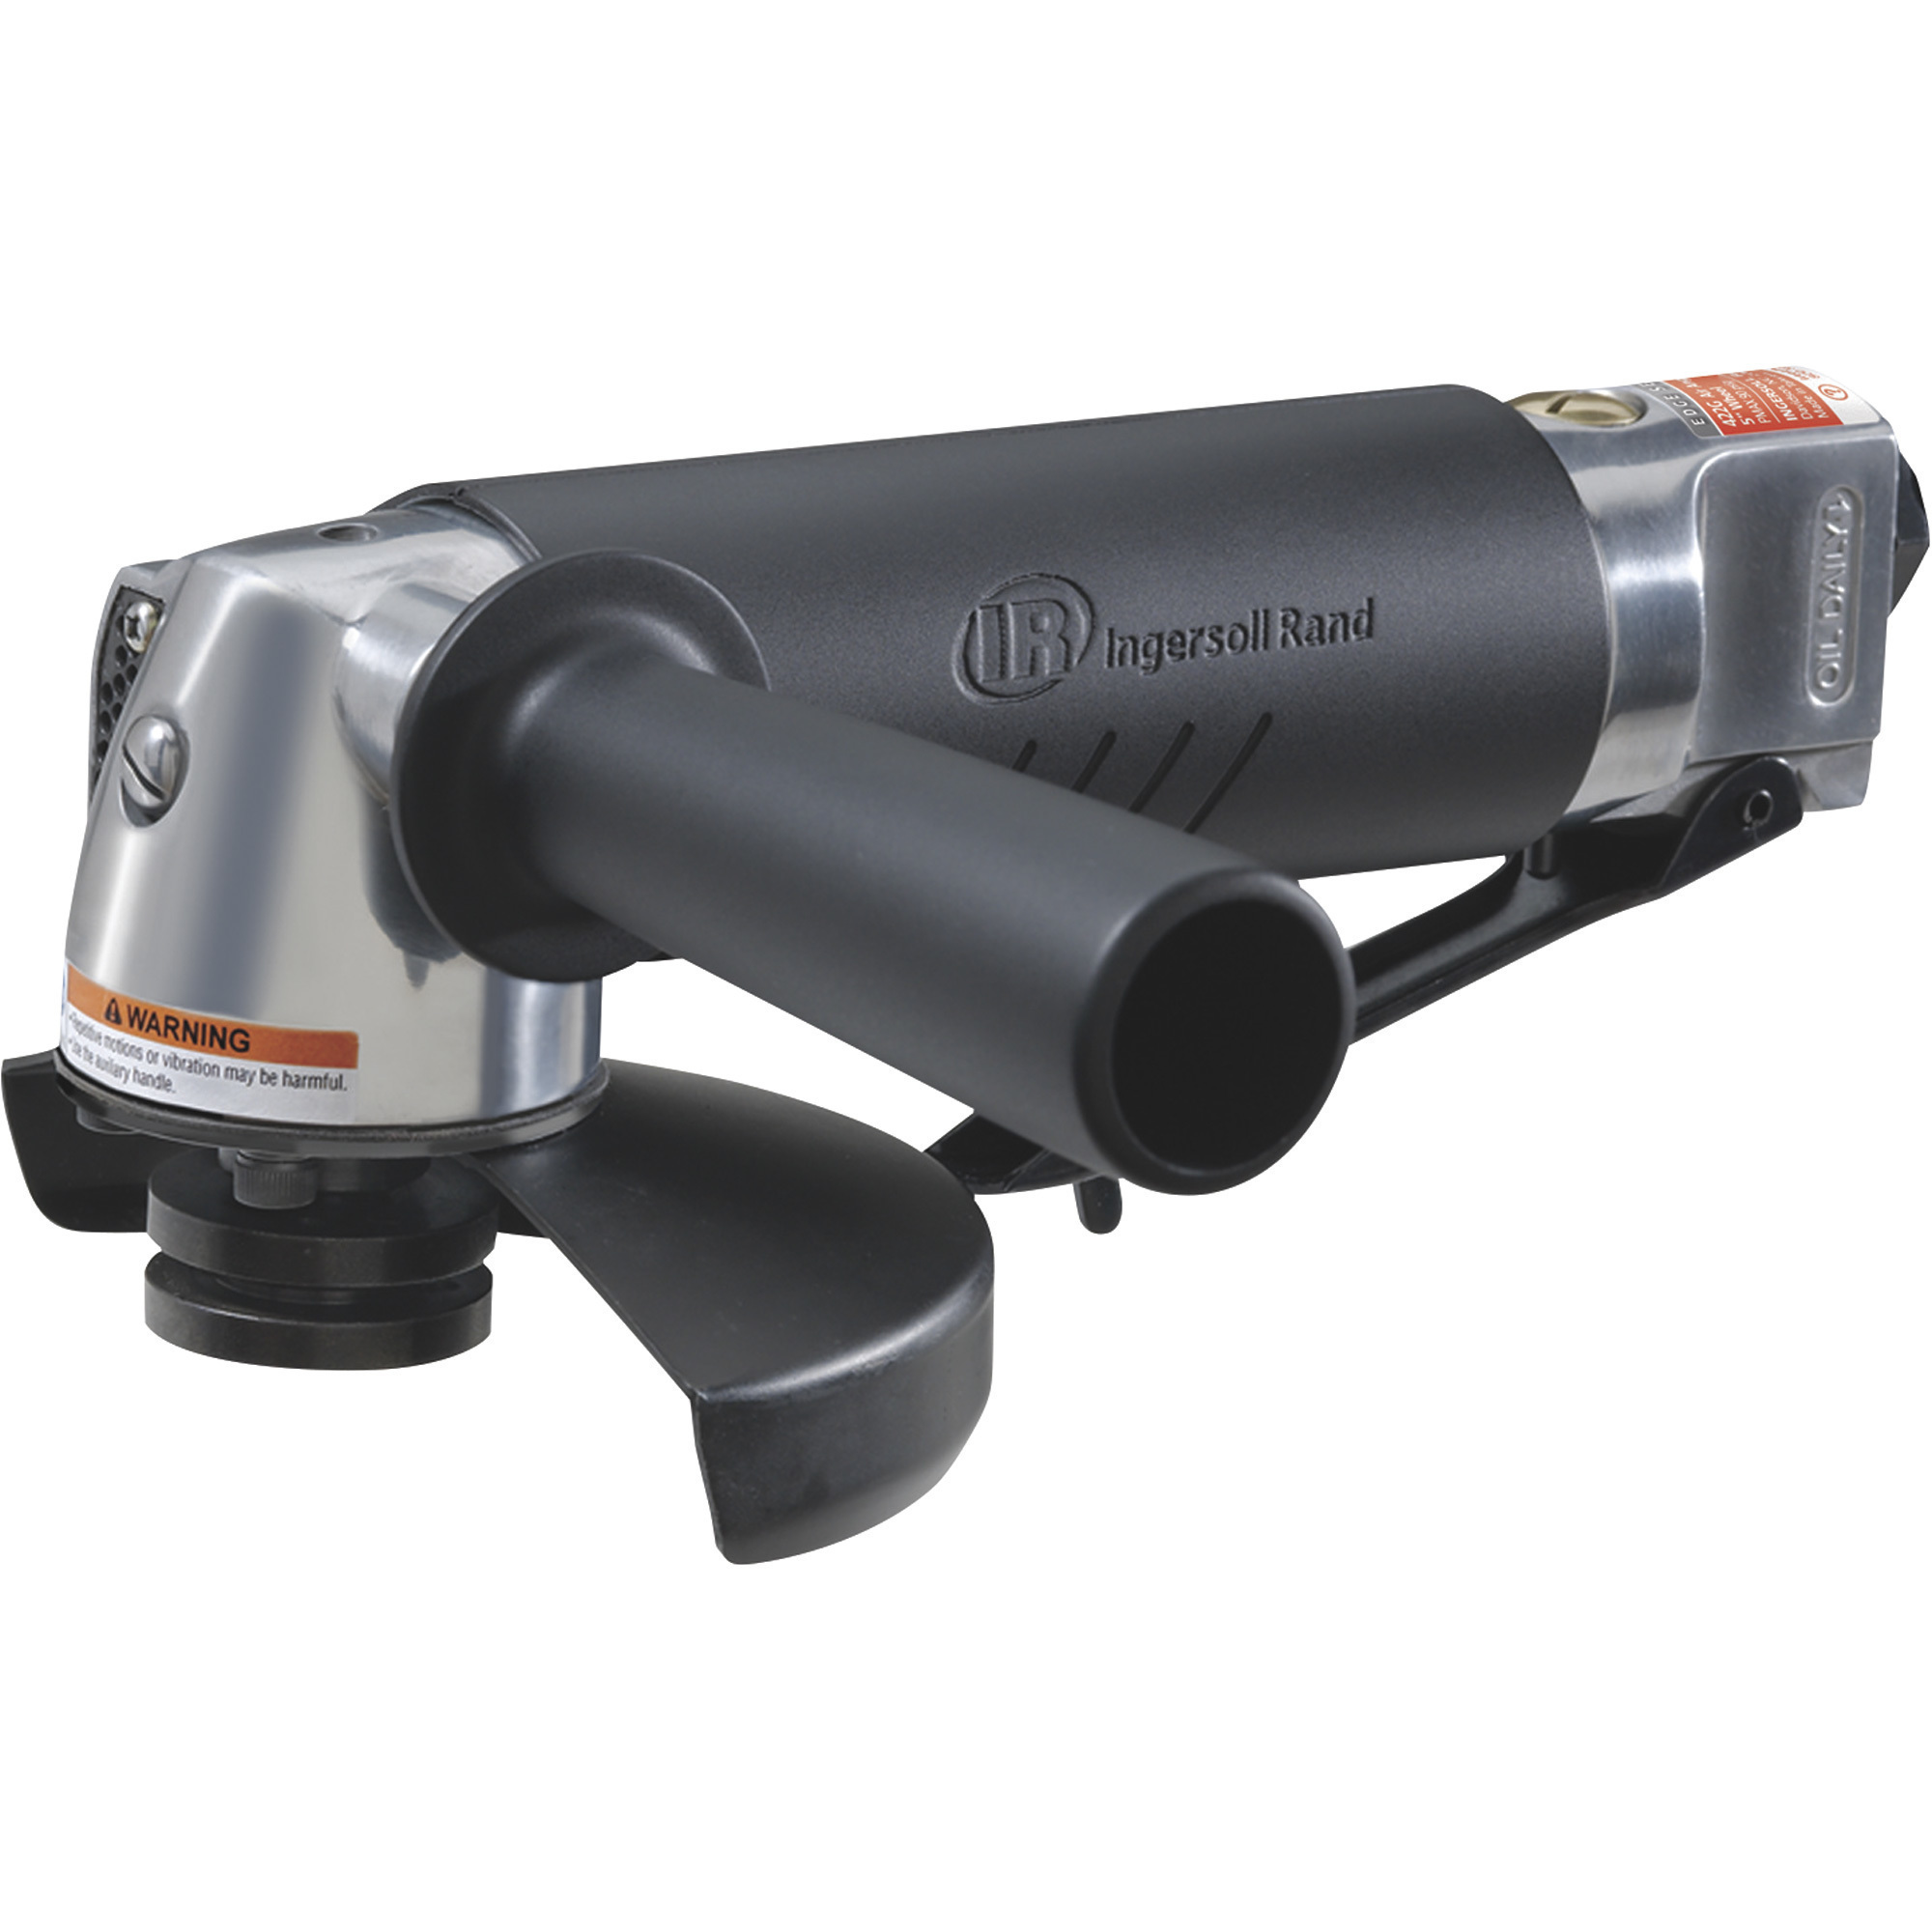 Ingersoll Rand Air Angle Grinder, 5Inch, Model 422G